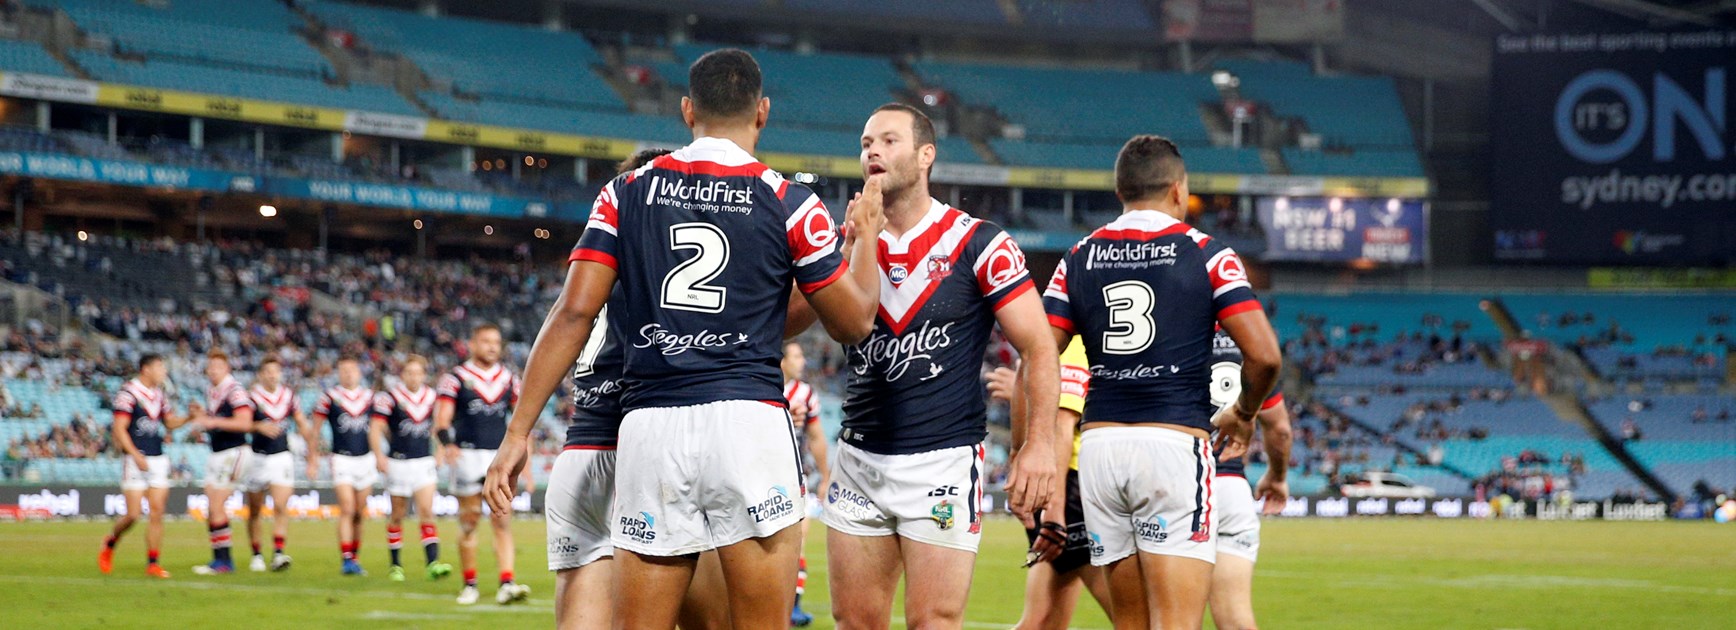 The Sydney Roosters in 2017.